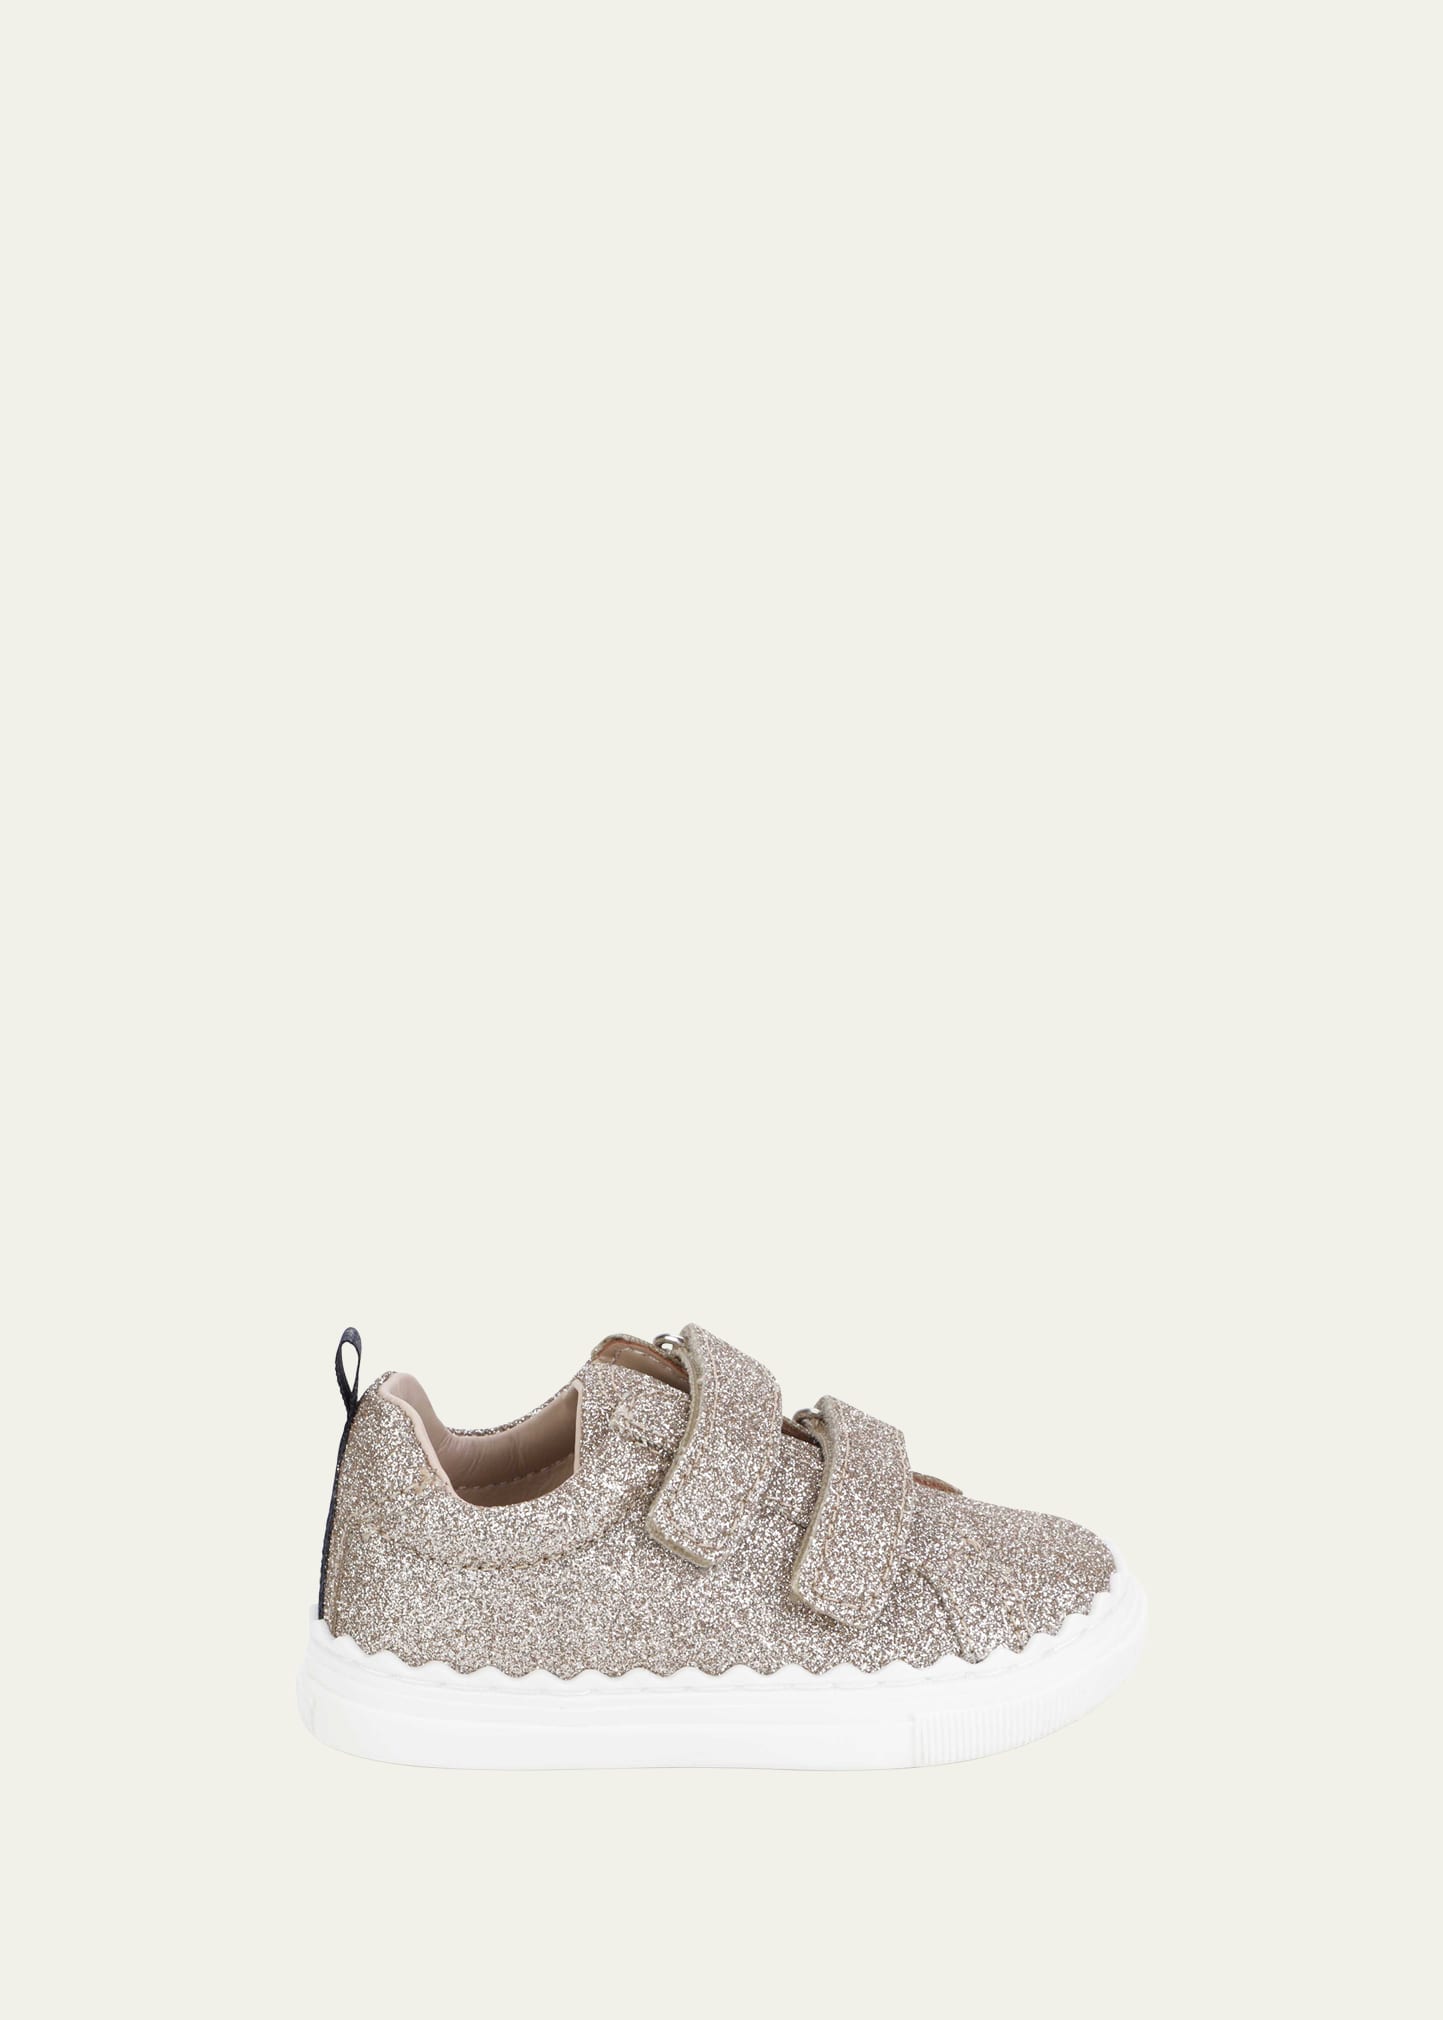 Chloé Kids' Girl's Grip Strap Glittery Calf Leather Sneakers, Baby In 32c-light Brown